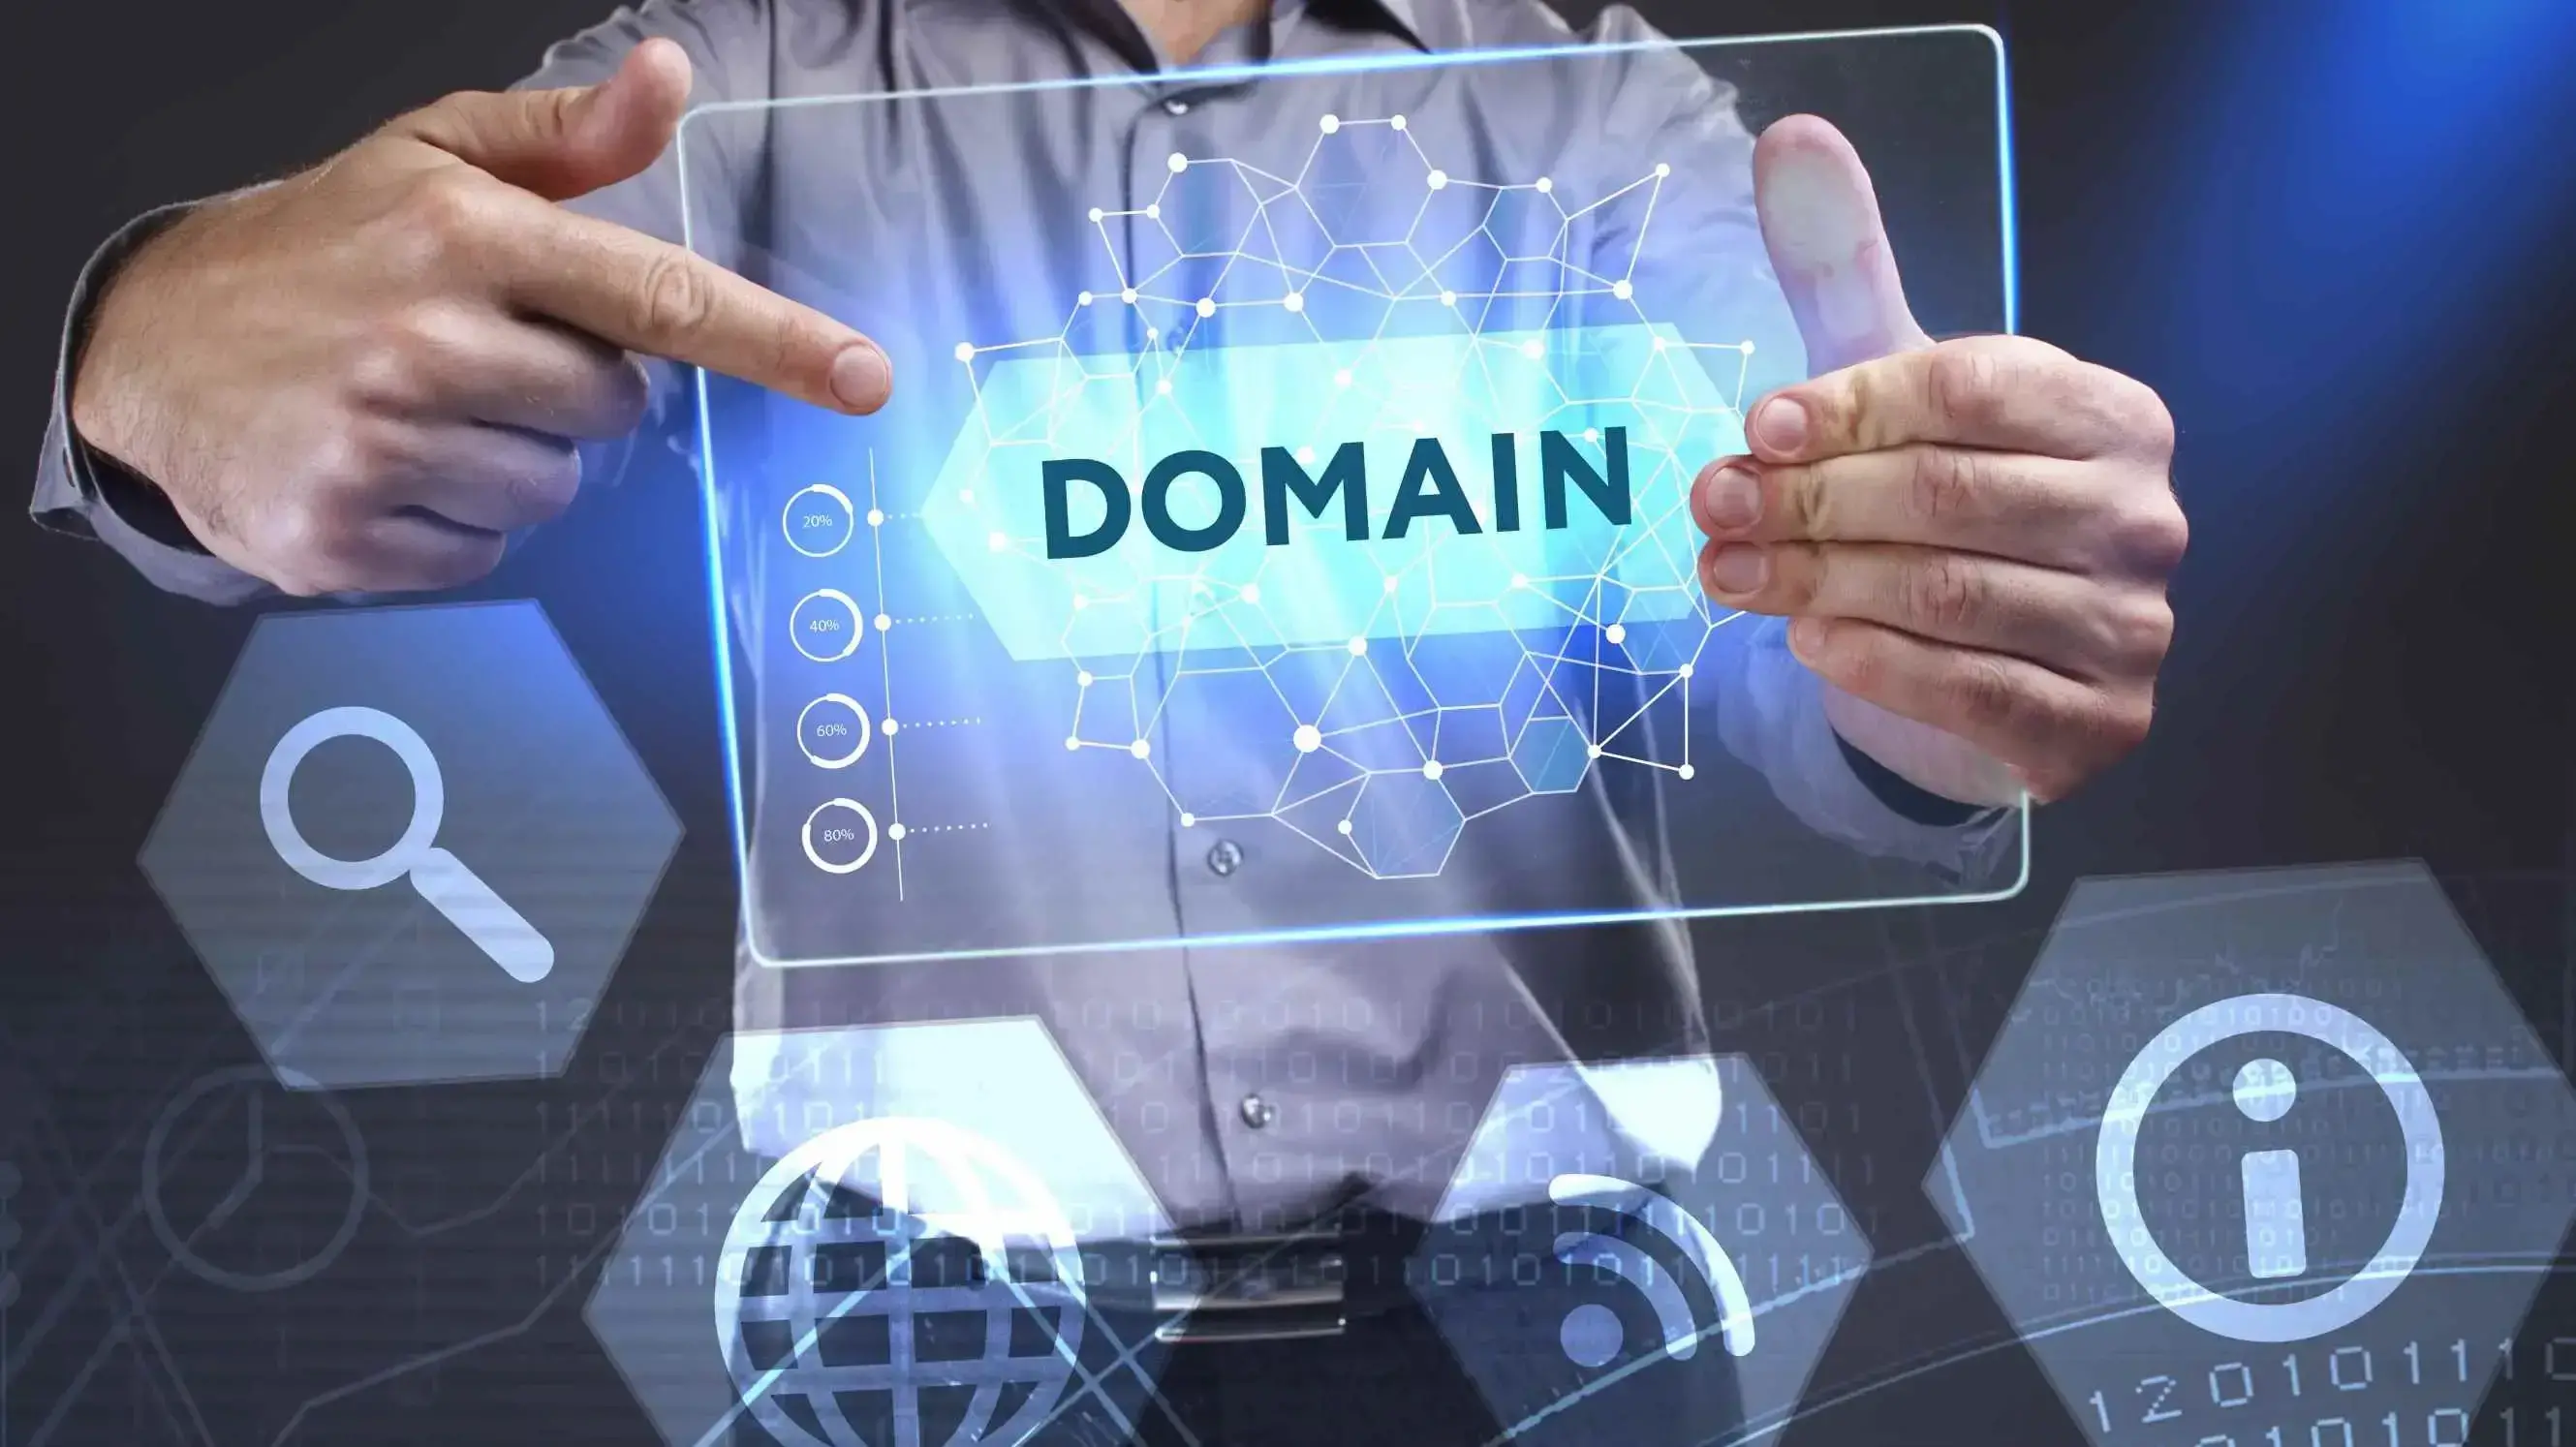 US Domain Restrictions You Need to Know Before Using This TLD